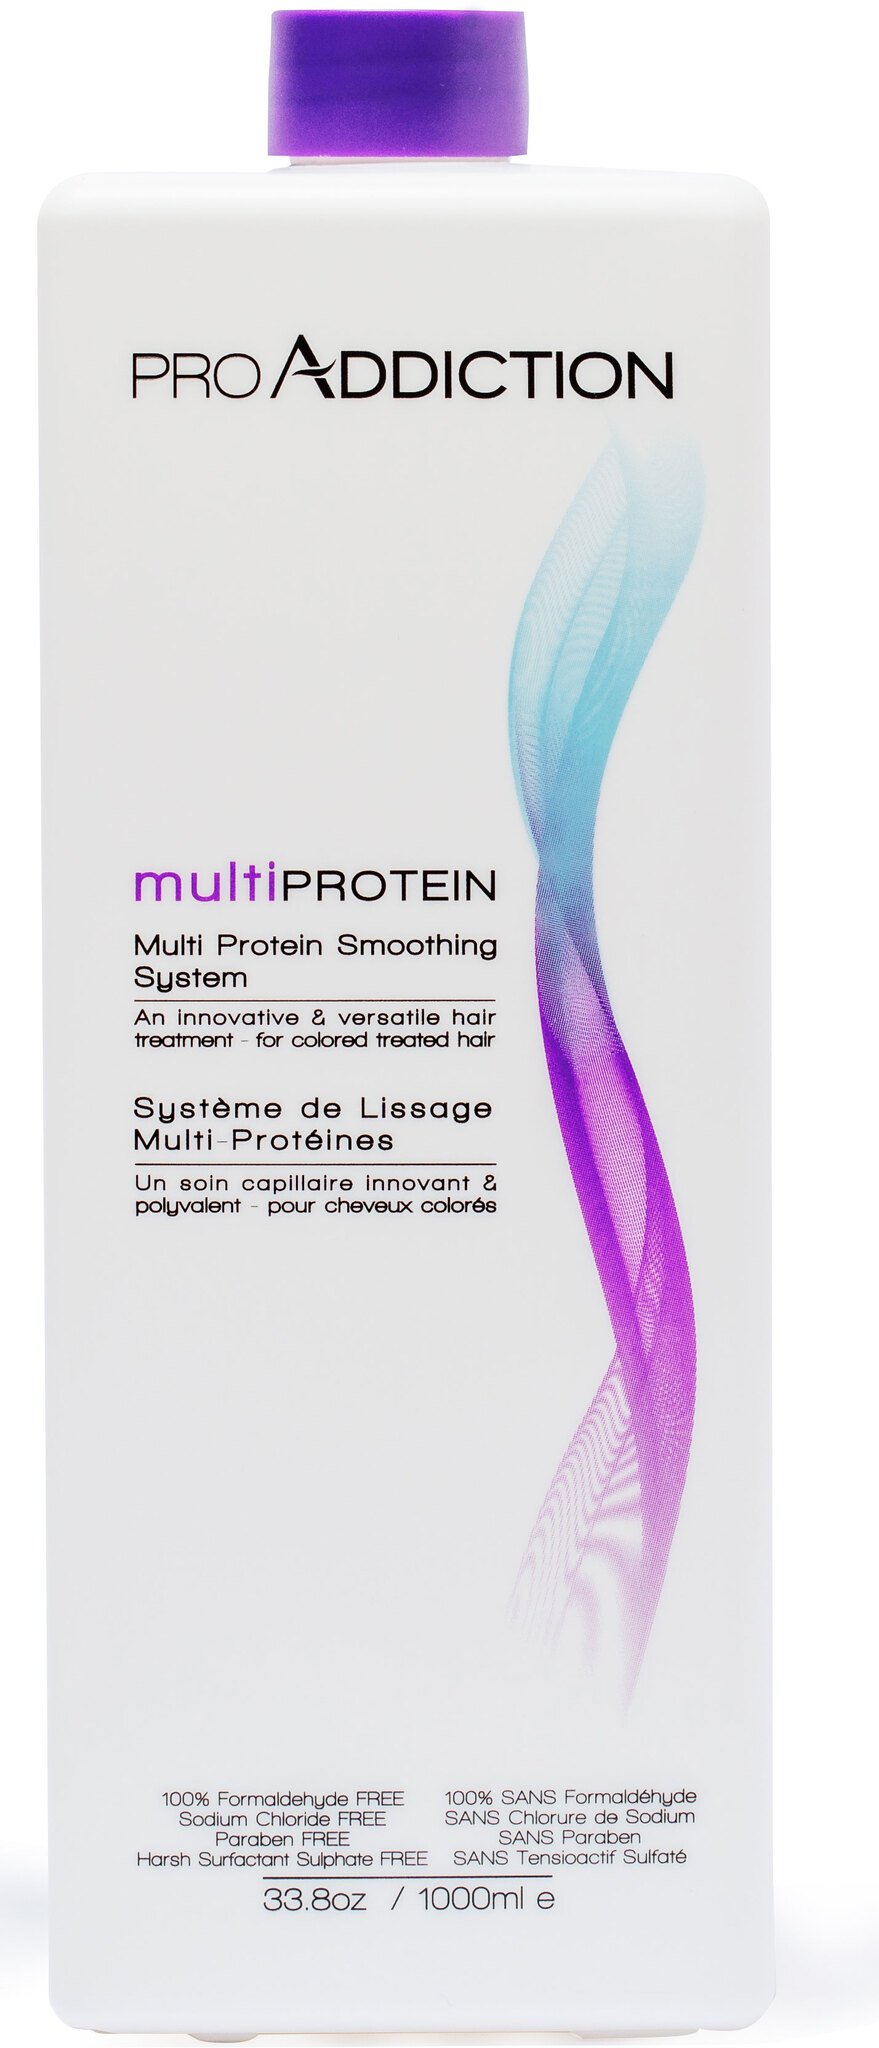 Proaddiction Litre Purple Smoothing System 1000ml